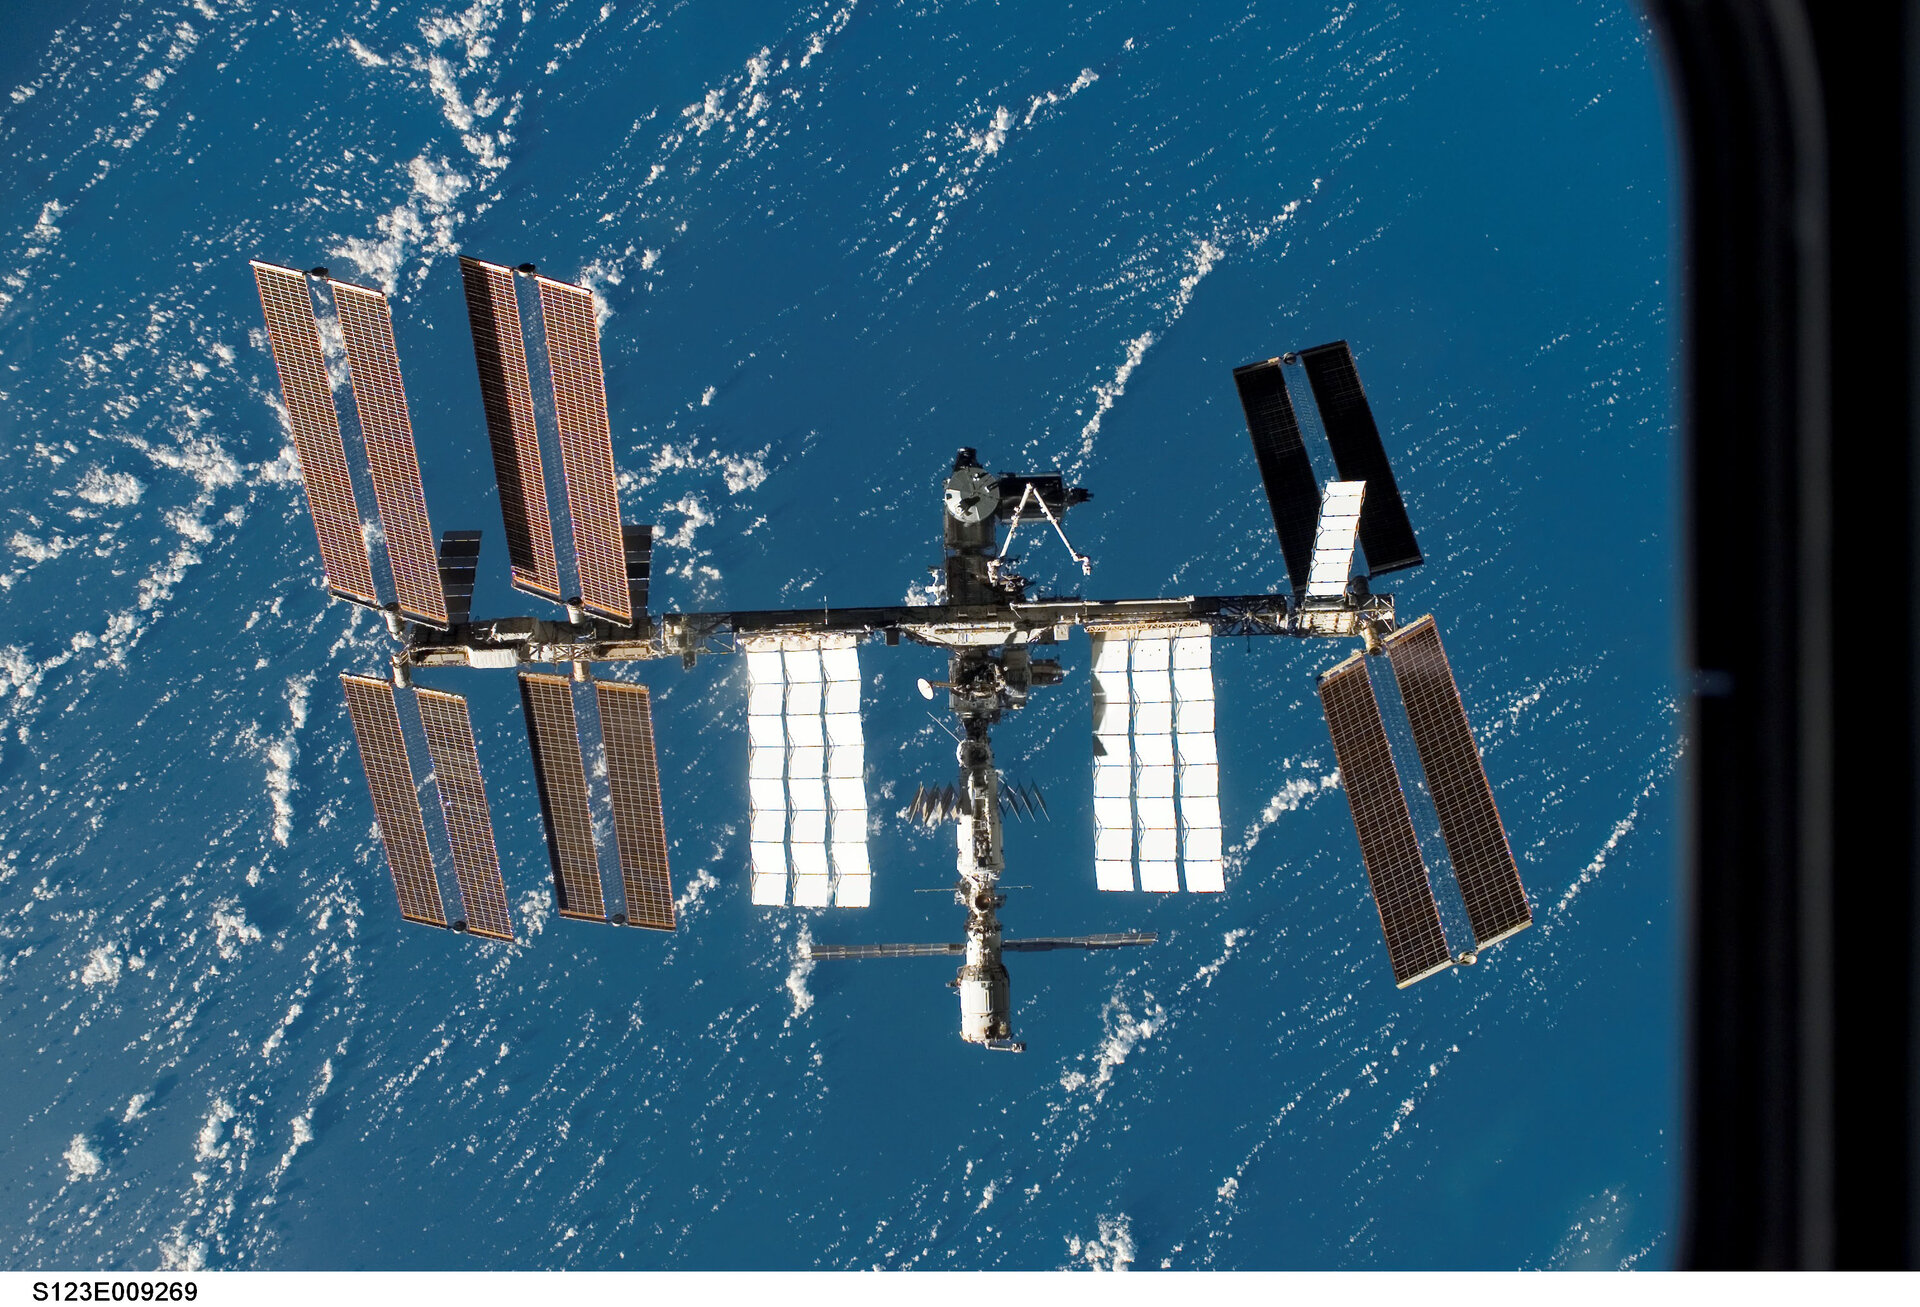 View of the International Space Station following undocking of the Shuttle on the STS-123 mission